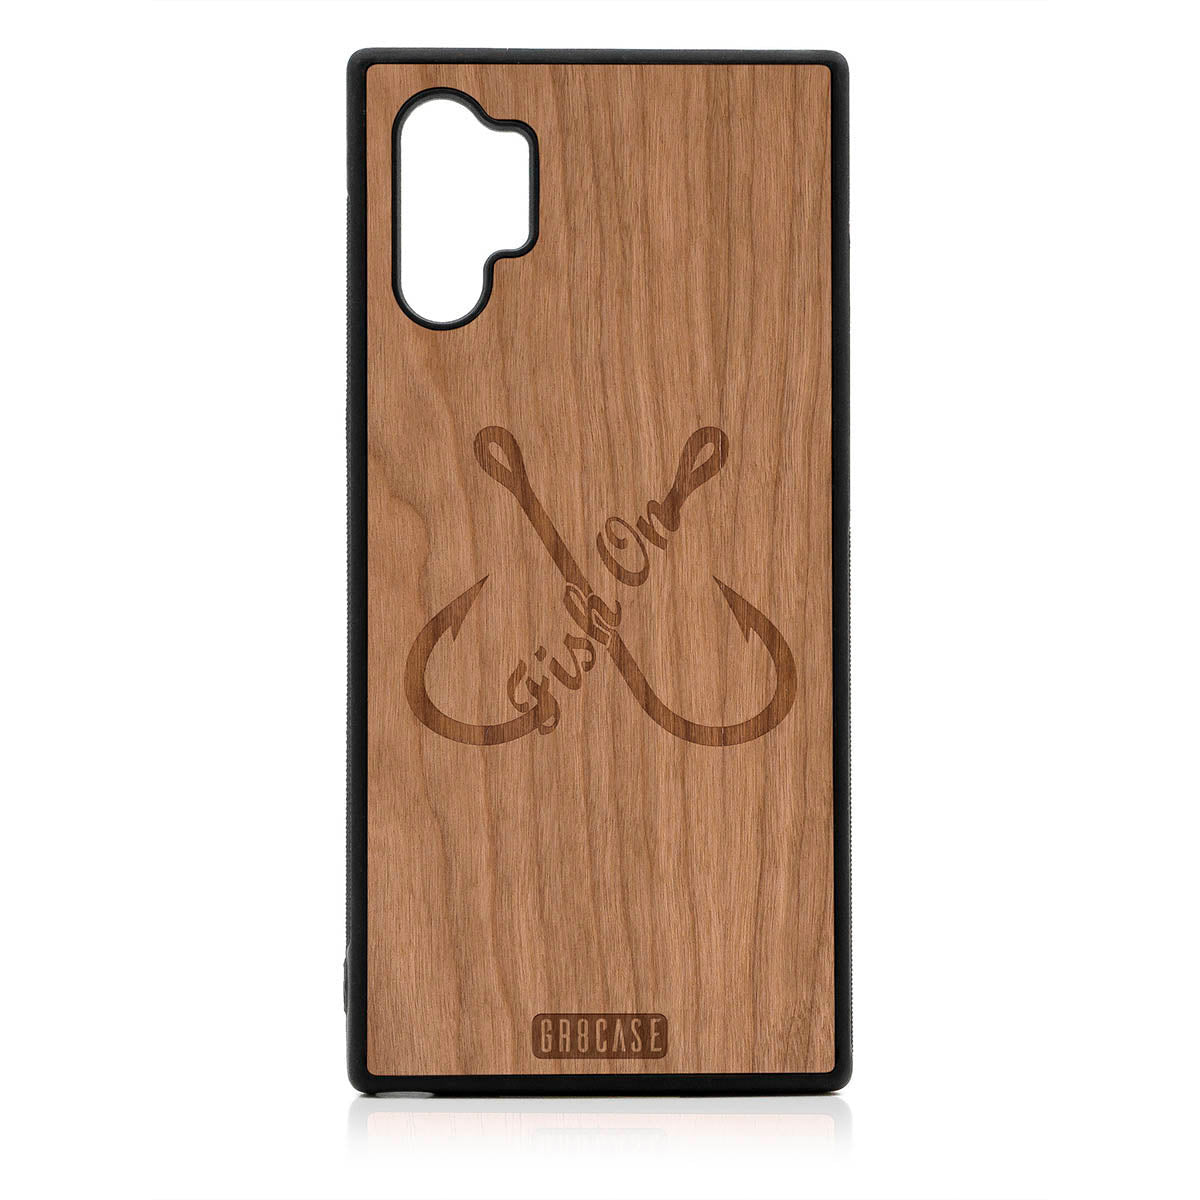 Fish On (Fish Hooks) Design Wood Case For Samsung Galaxy Note 10 Plus by GR8CASE